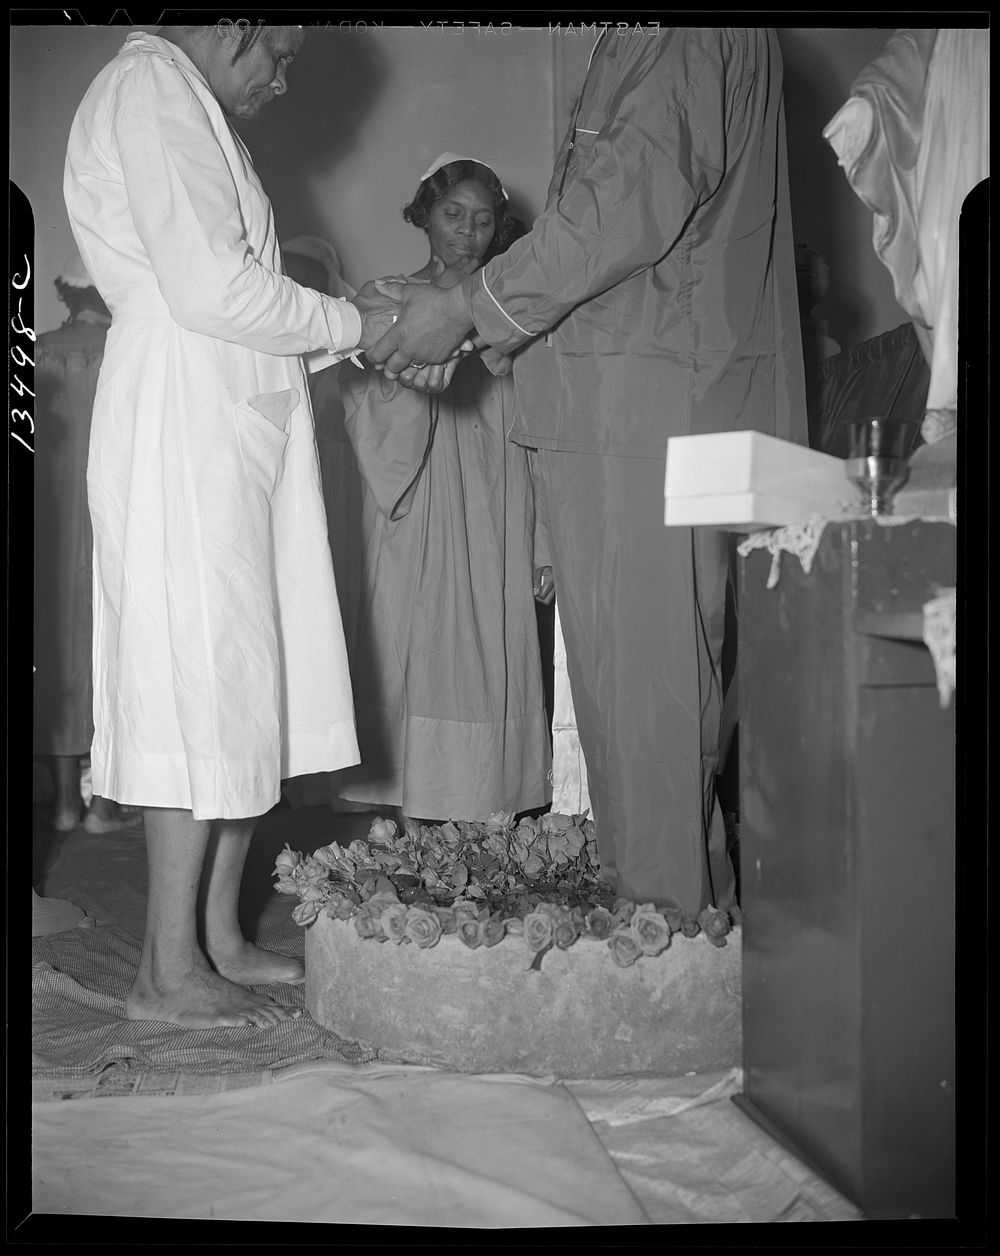 Washington, D.C. Reverend Vondell Gassaway, pastor of the St. Martin's Spiritual Church, giving the final blessing and a…